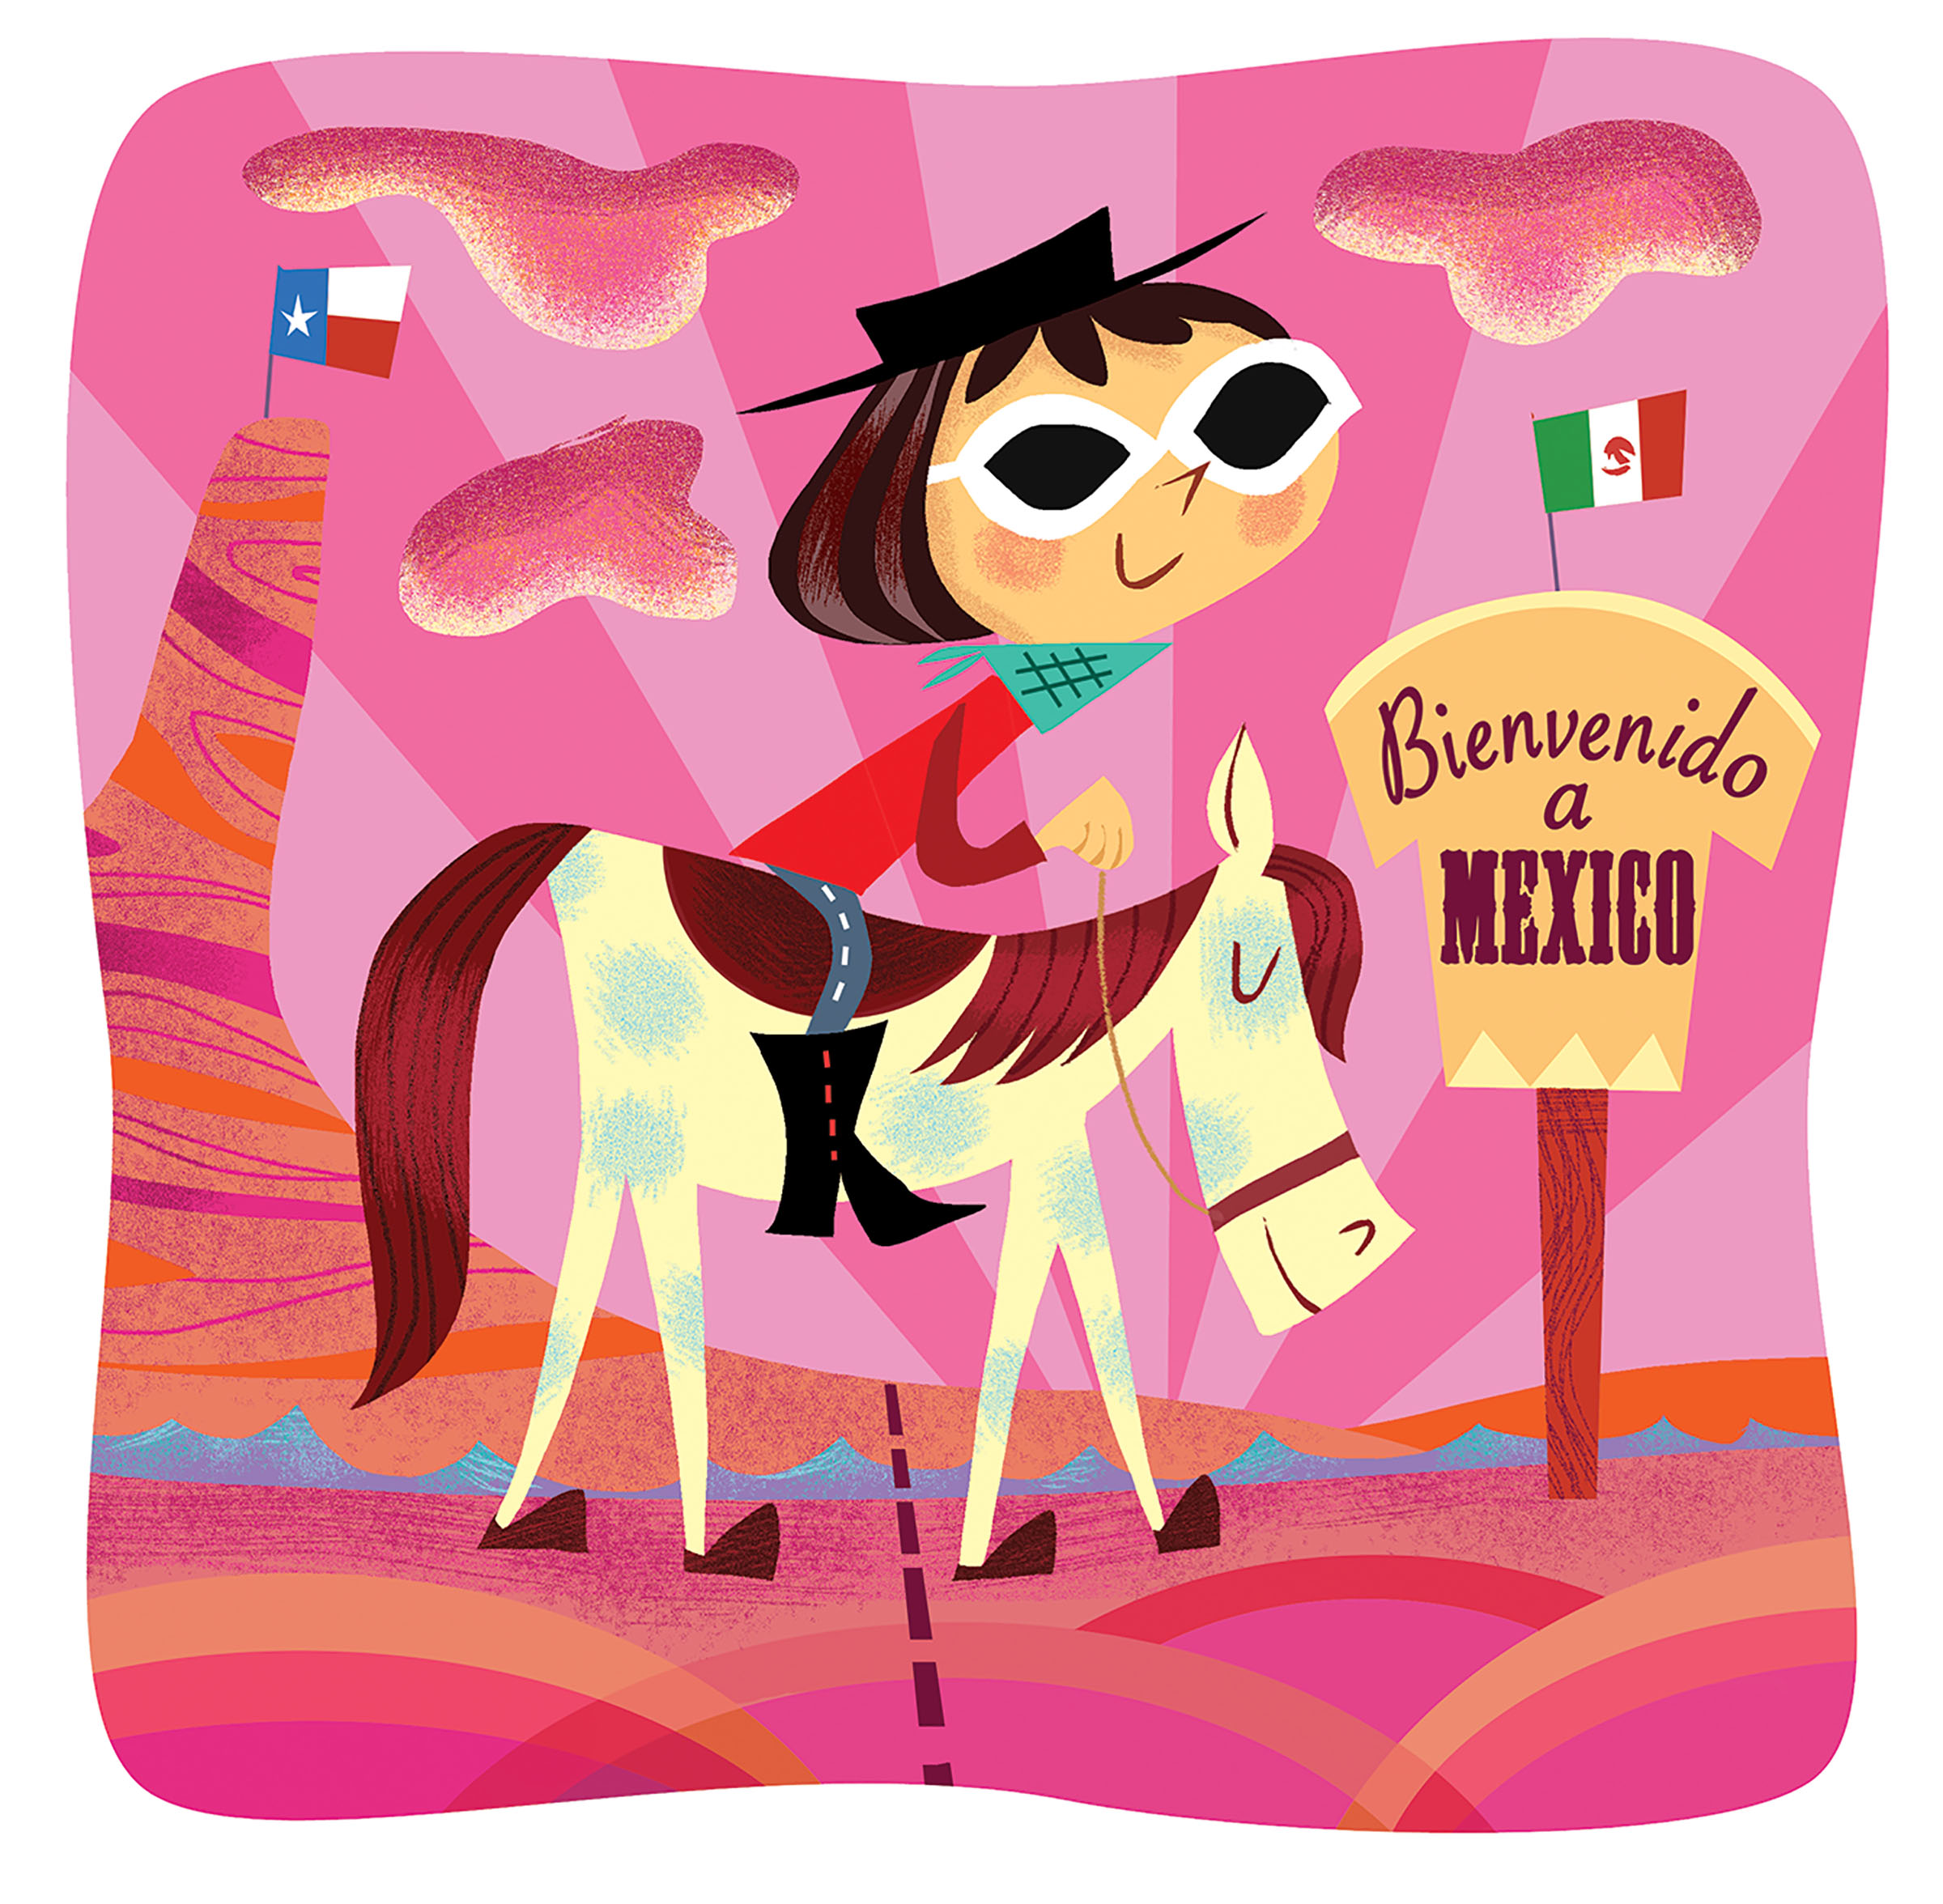 A cartoon illustrationo of a young woman on a horse crossing the U.S./Mexico border with Big Bend in the background